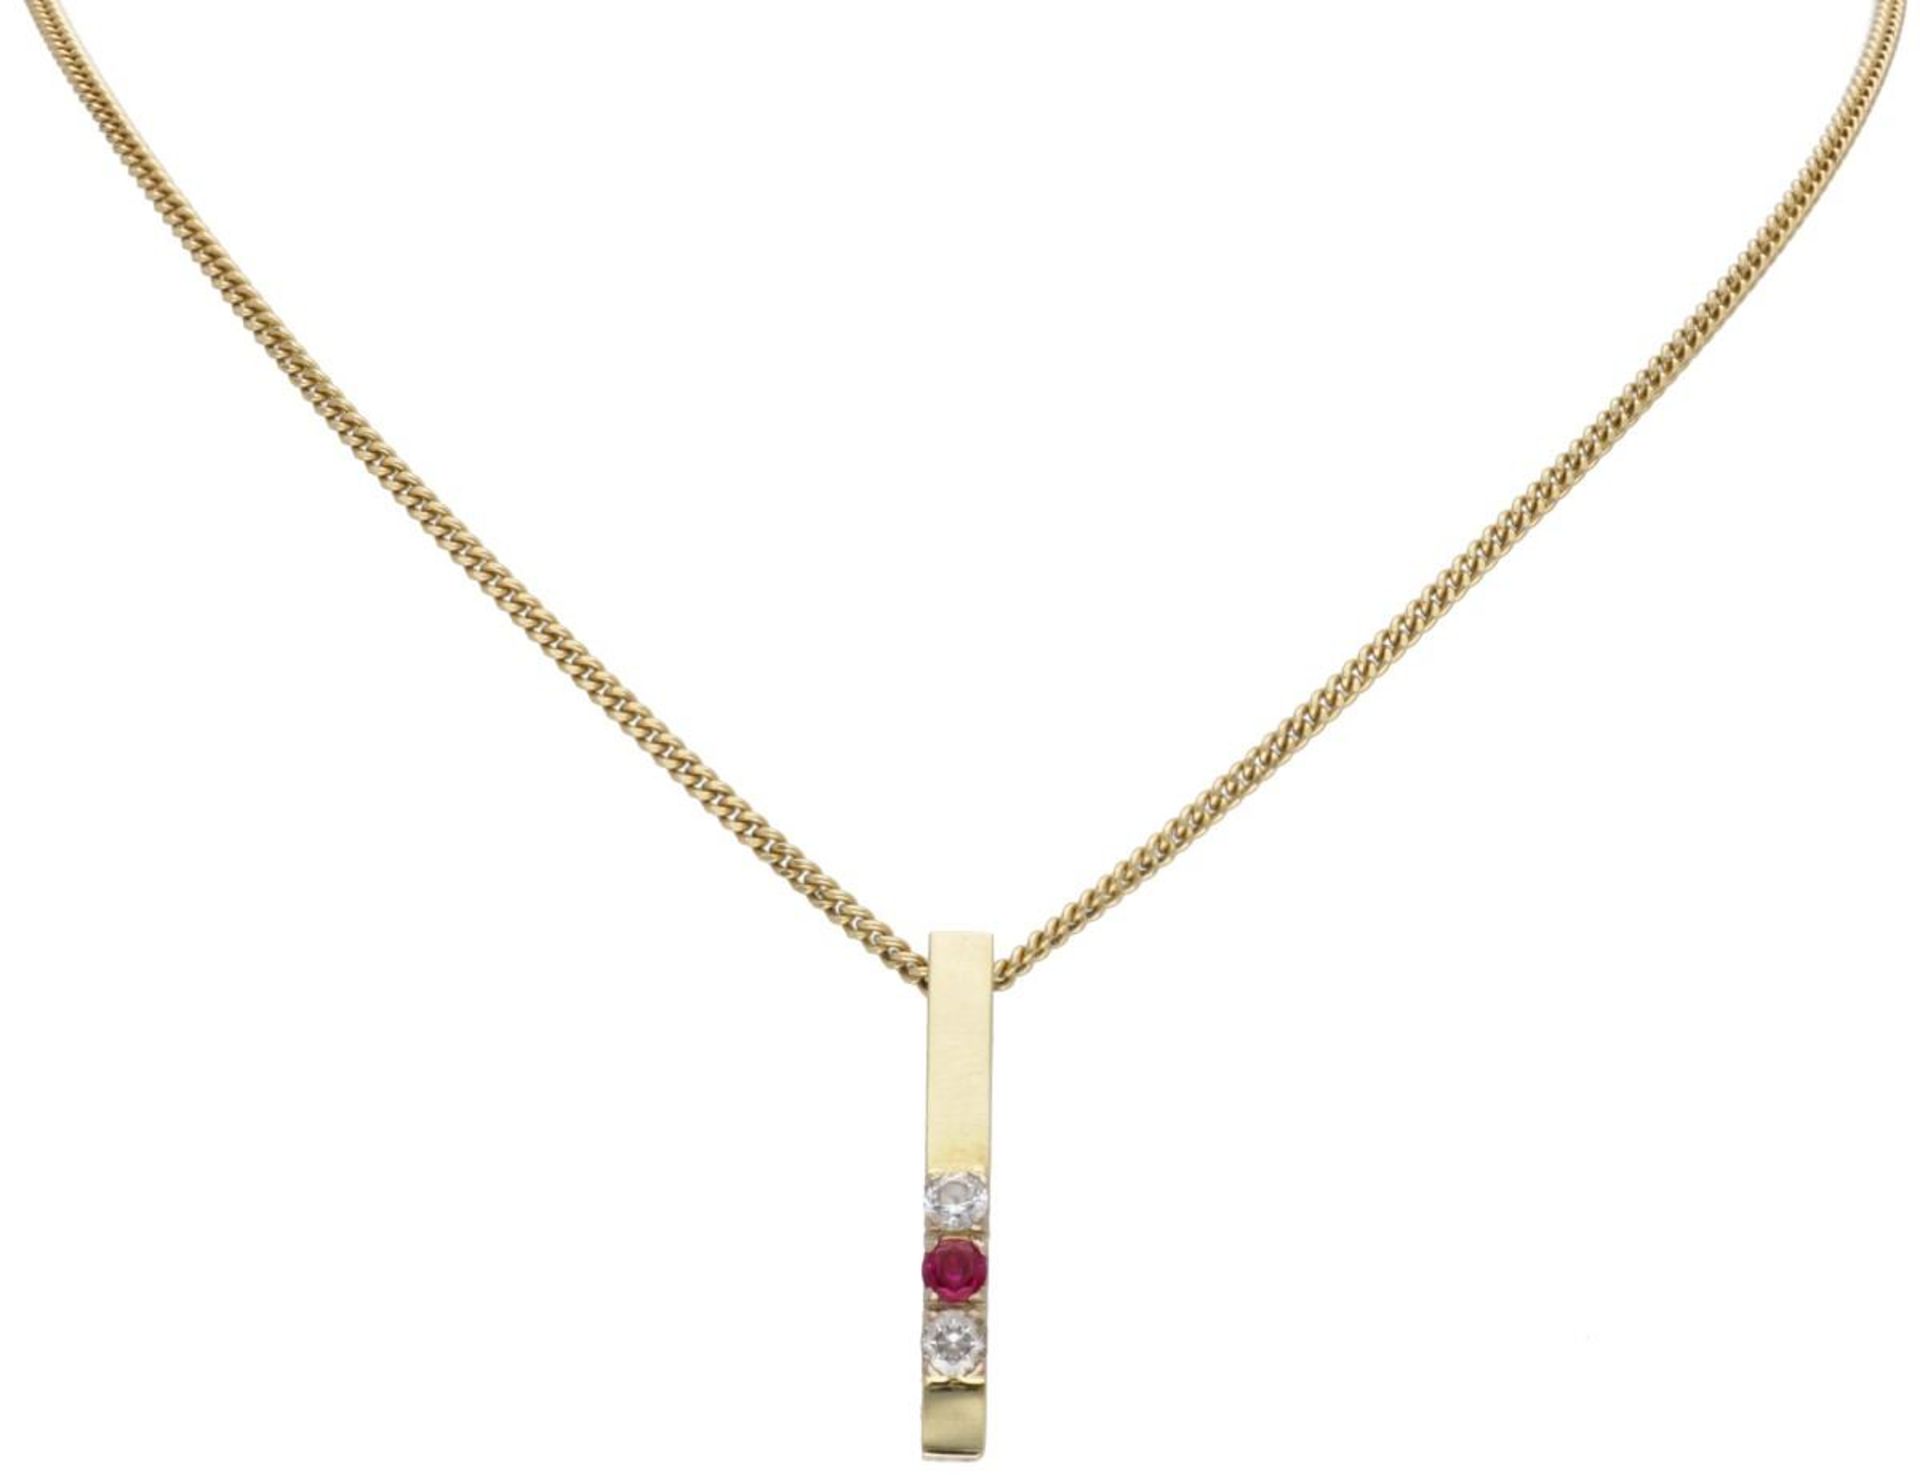 14kt. Yellow gold gourmet link necklace with pendant set with approx. 0.10 ct. ruby.